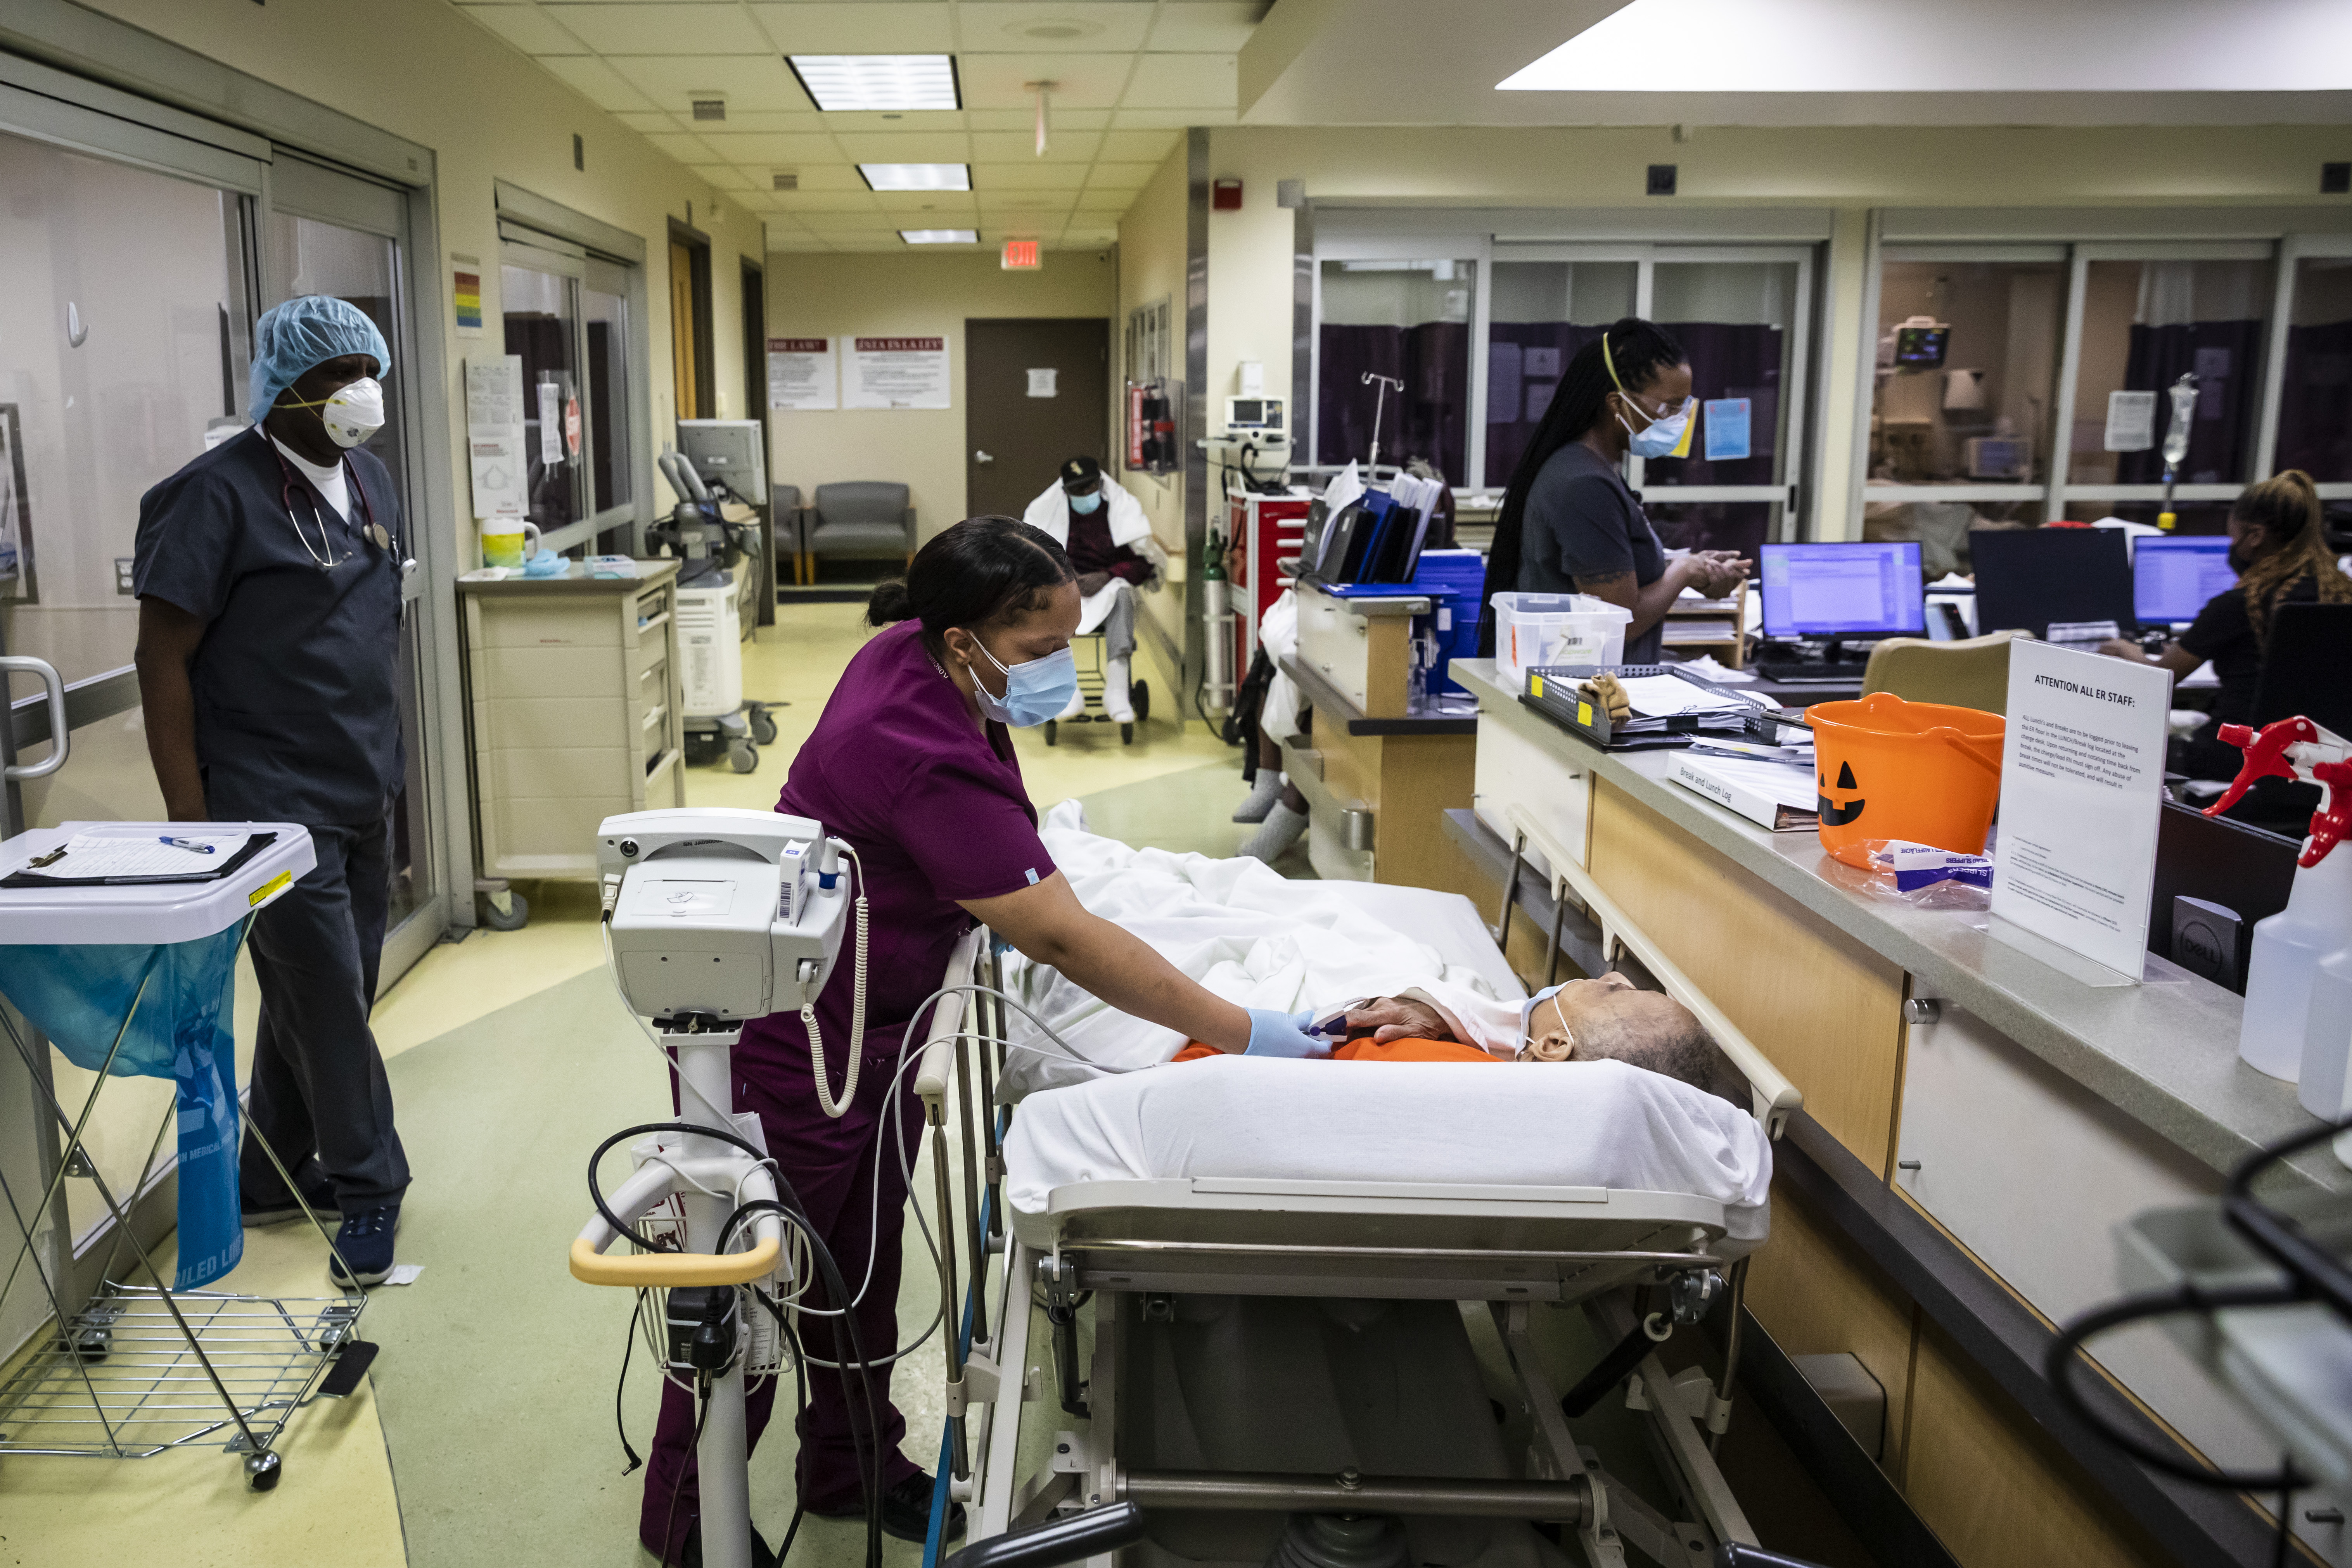 Medical assistant Cassandra Munoz checks a patient’s vitals in the hallway, as no rooms were open last week in the Emergency Department at Roseland Community Hospital on the Far South Side.